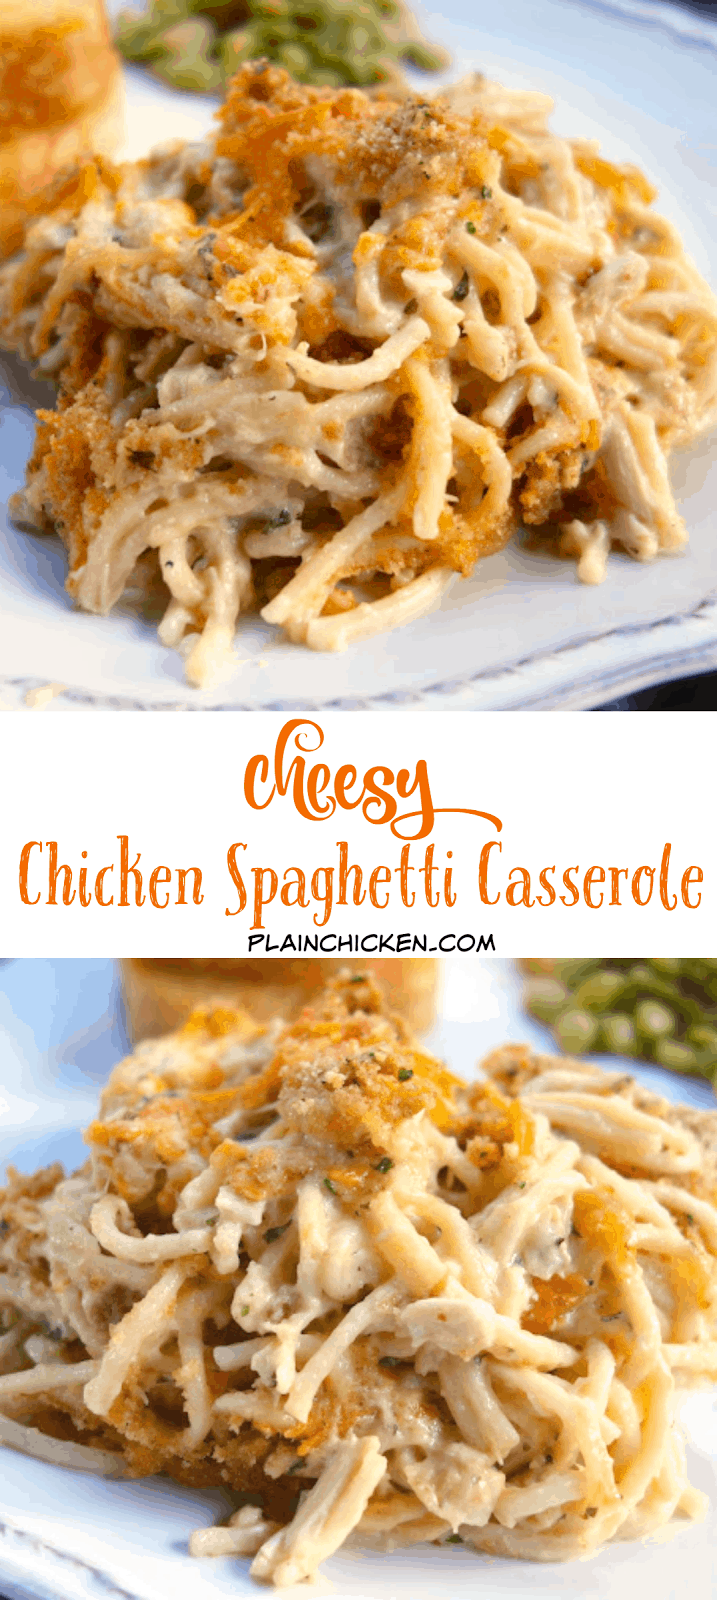 Cheesy Chicken Spaghetti Casserole - chicken, spaghetti, cream of chicken soup, sour cream, butter, seasonings, Parmesan and cheddar cheese -THE BEST! We make this once a month! Makes a great freezer meal! 